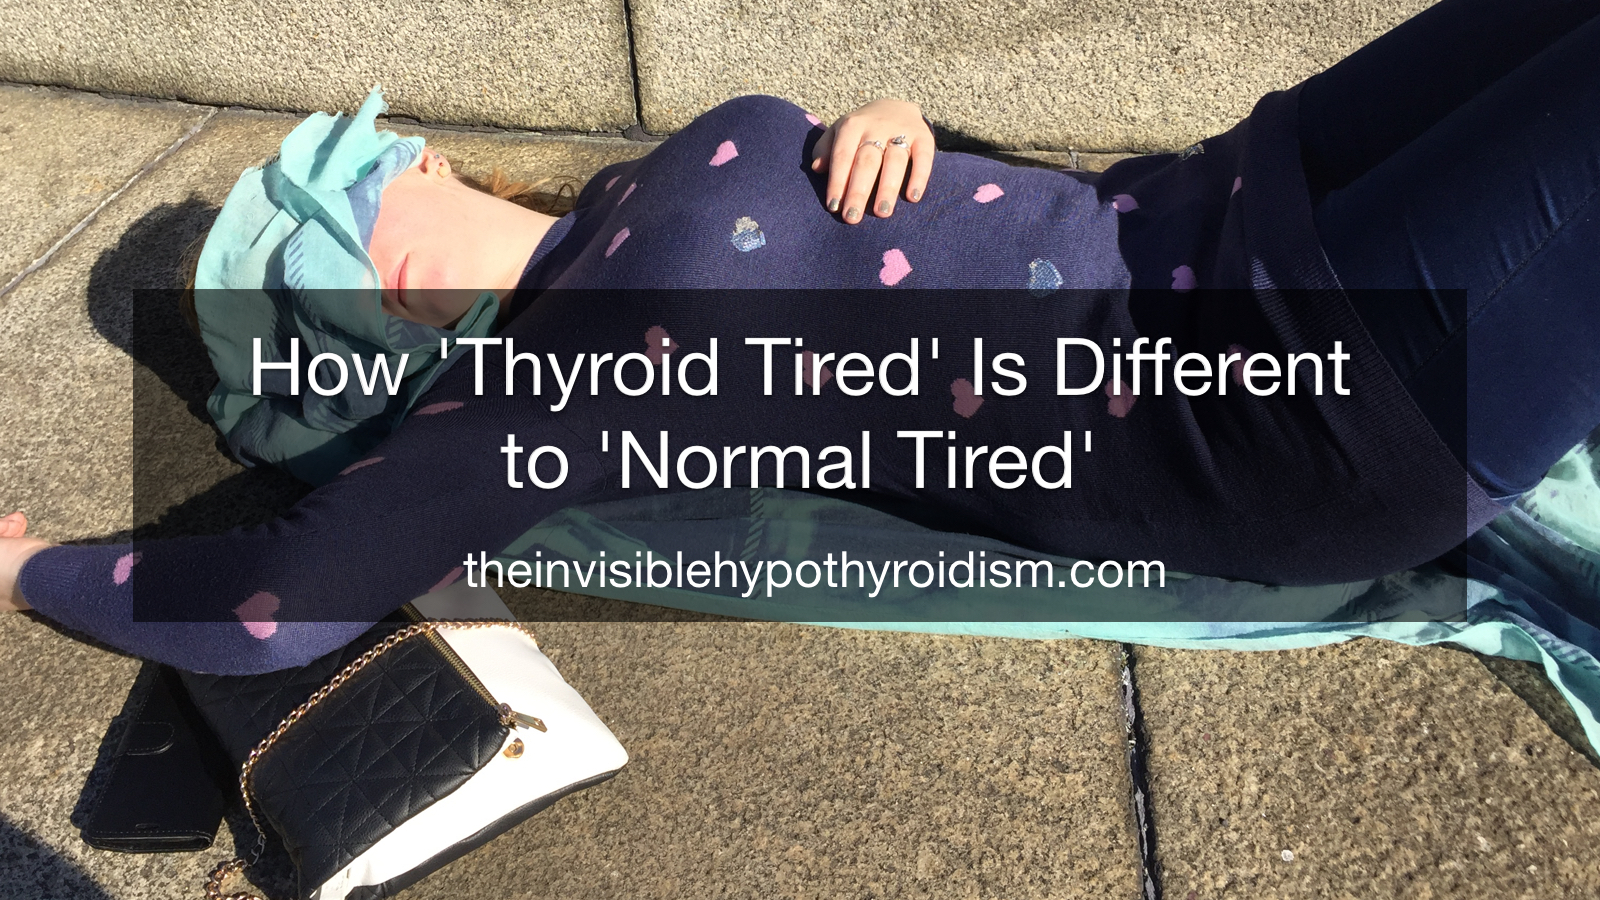 How 'Thyroid Tired' Is Different to 'Normal Tired'